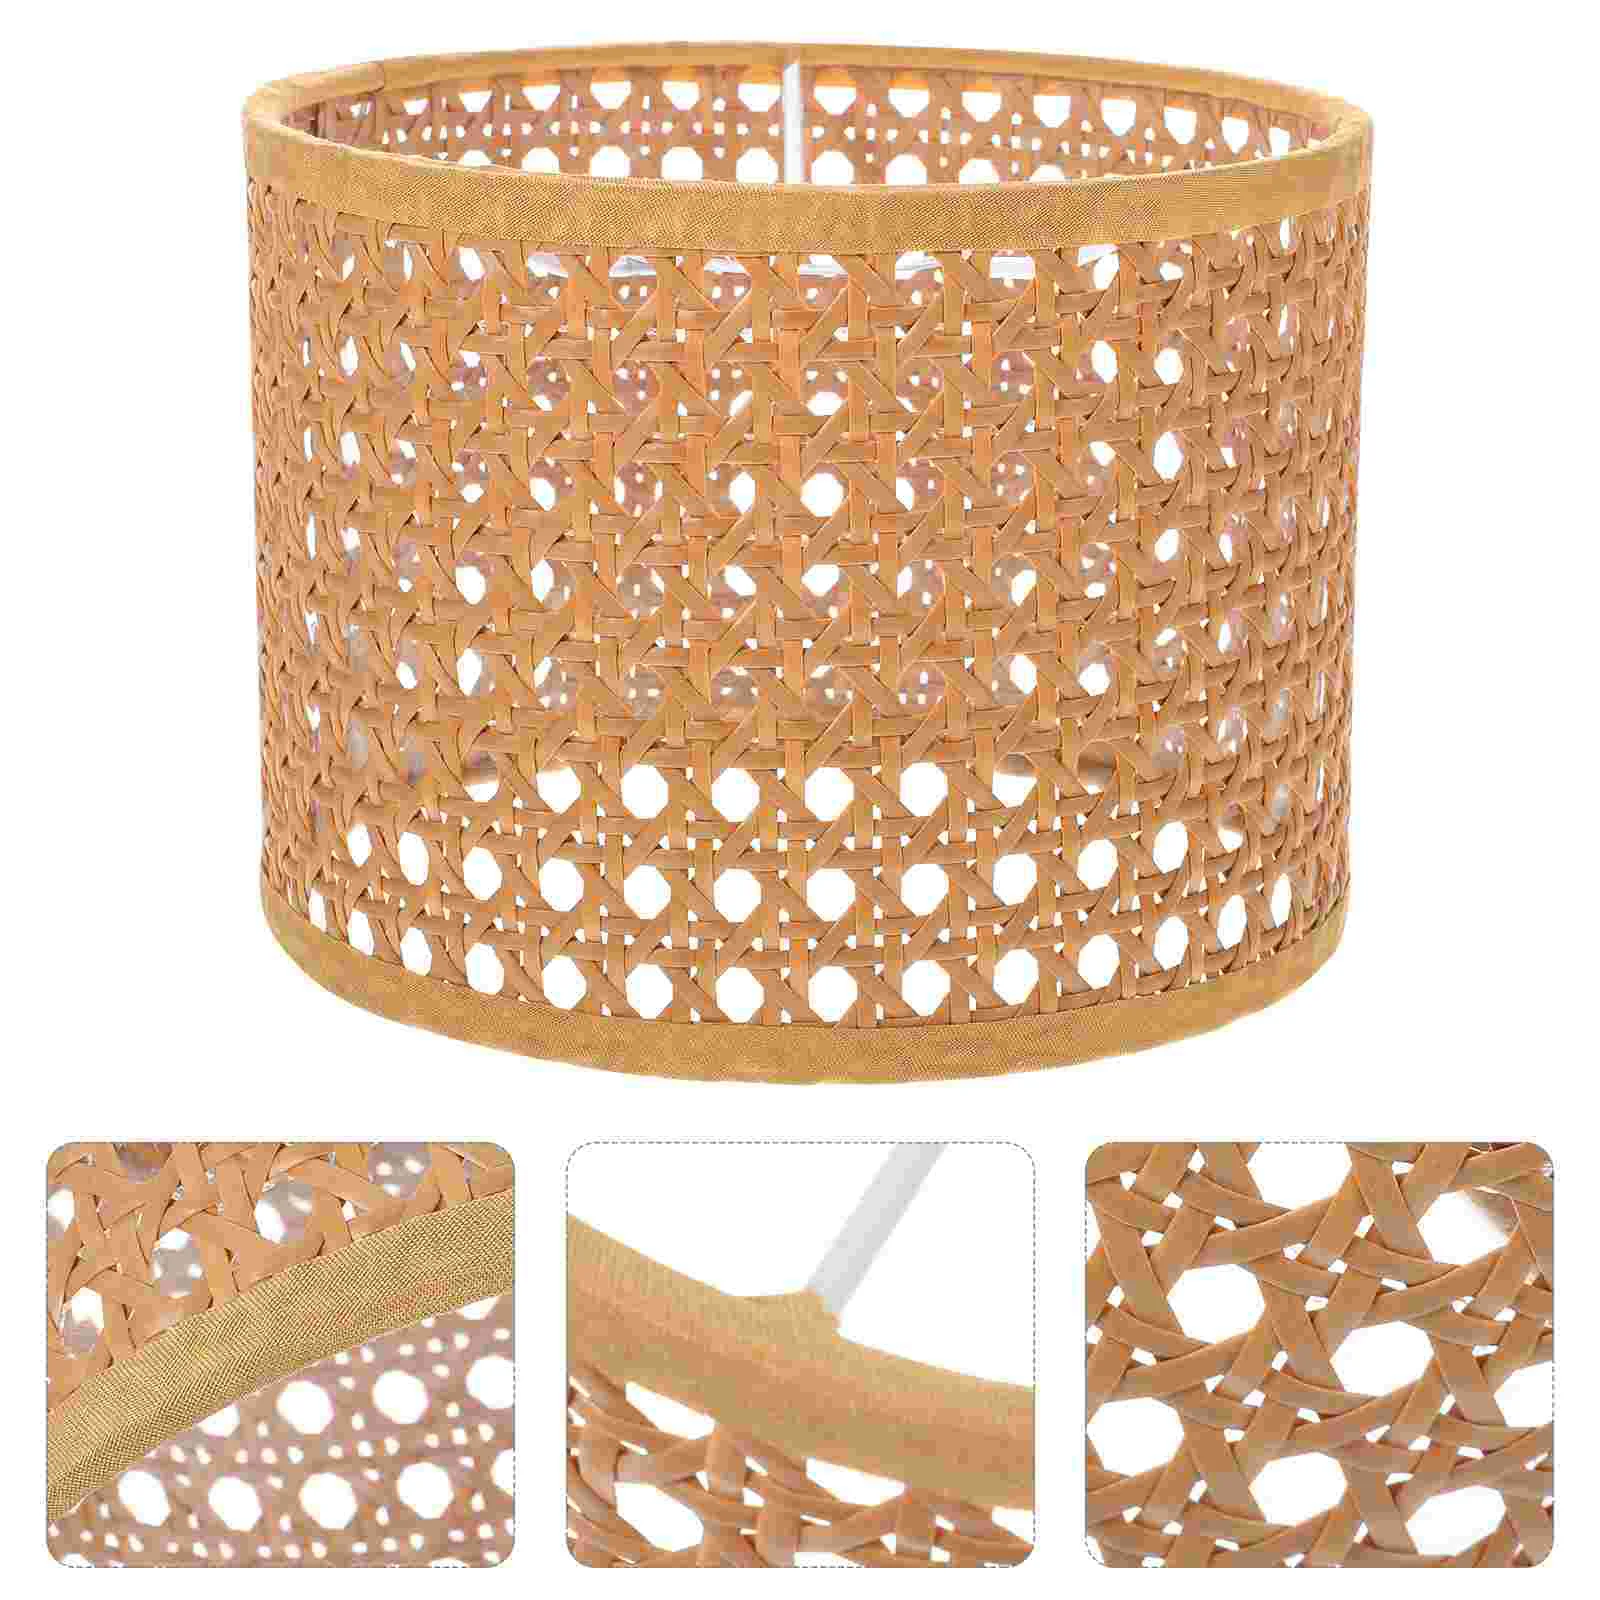 

Cage Hand Woven Lampshade Ceiling Rattan Baskets Storage Decorate Cover Adornment Delicate Creative Rustic Lantern